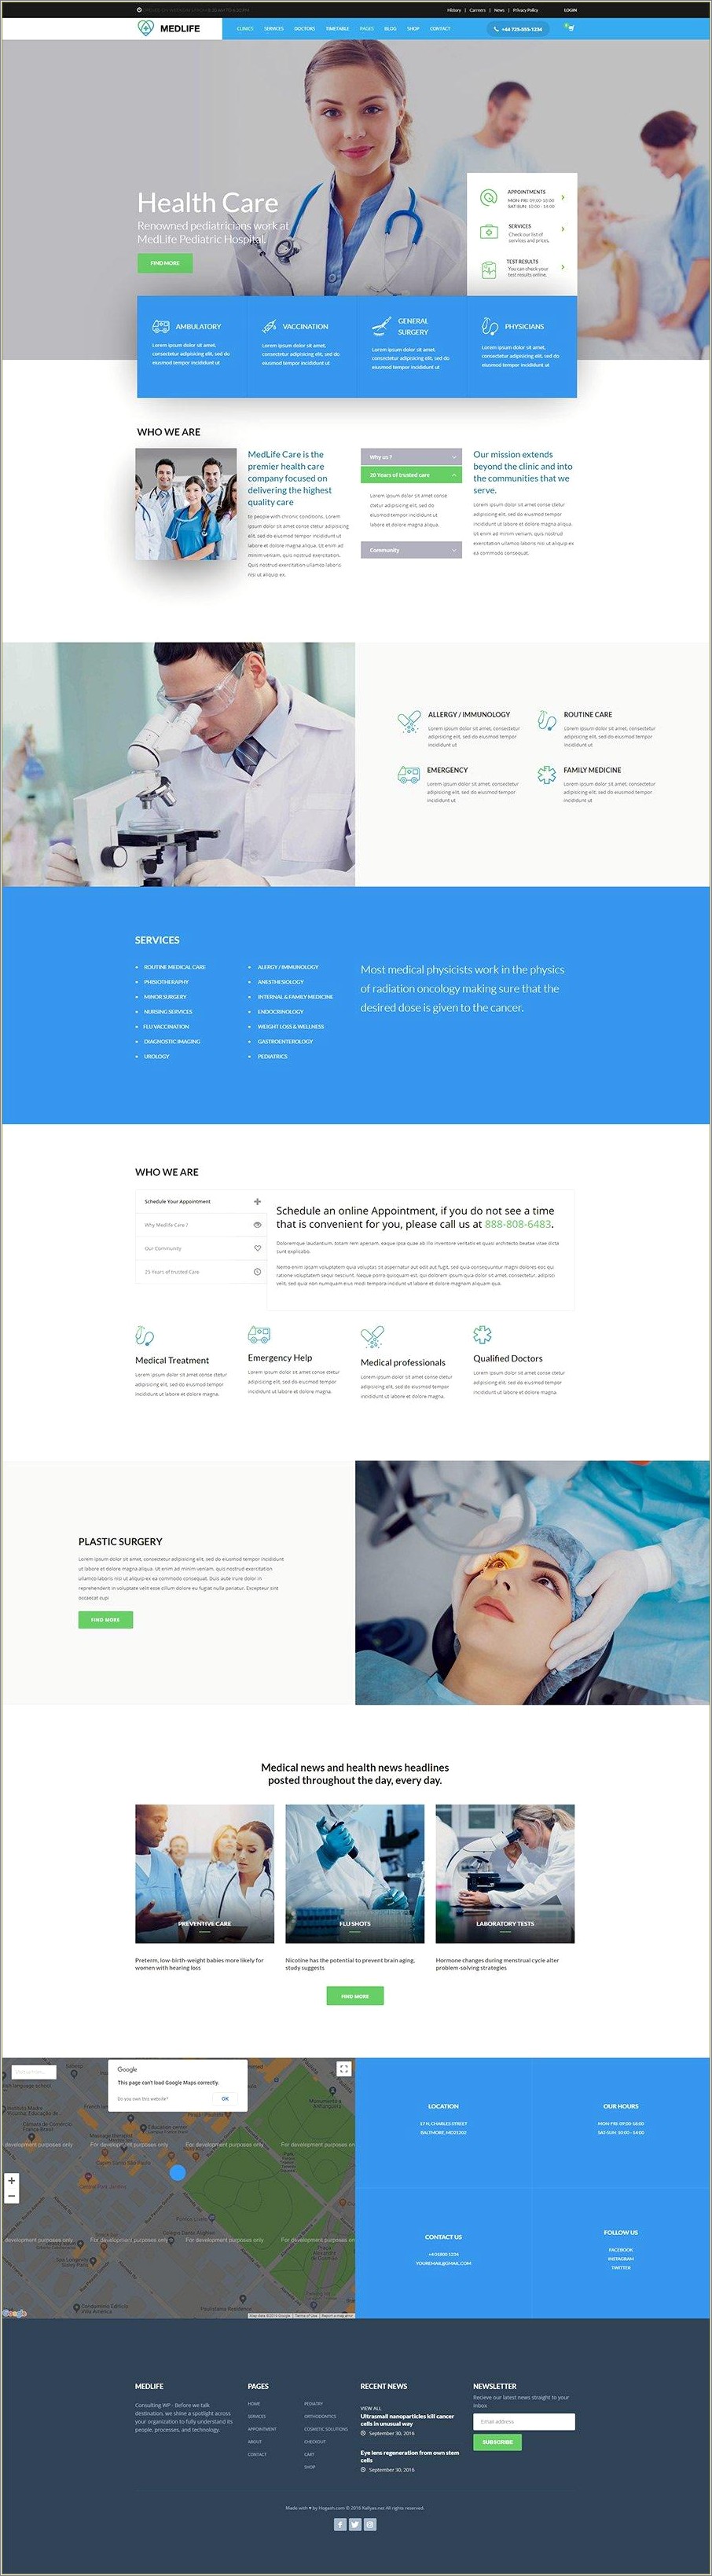 Free Html Templates For Hospital Management System